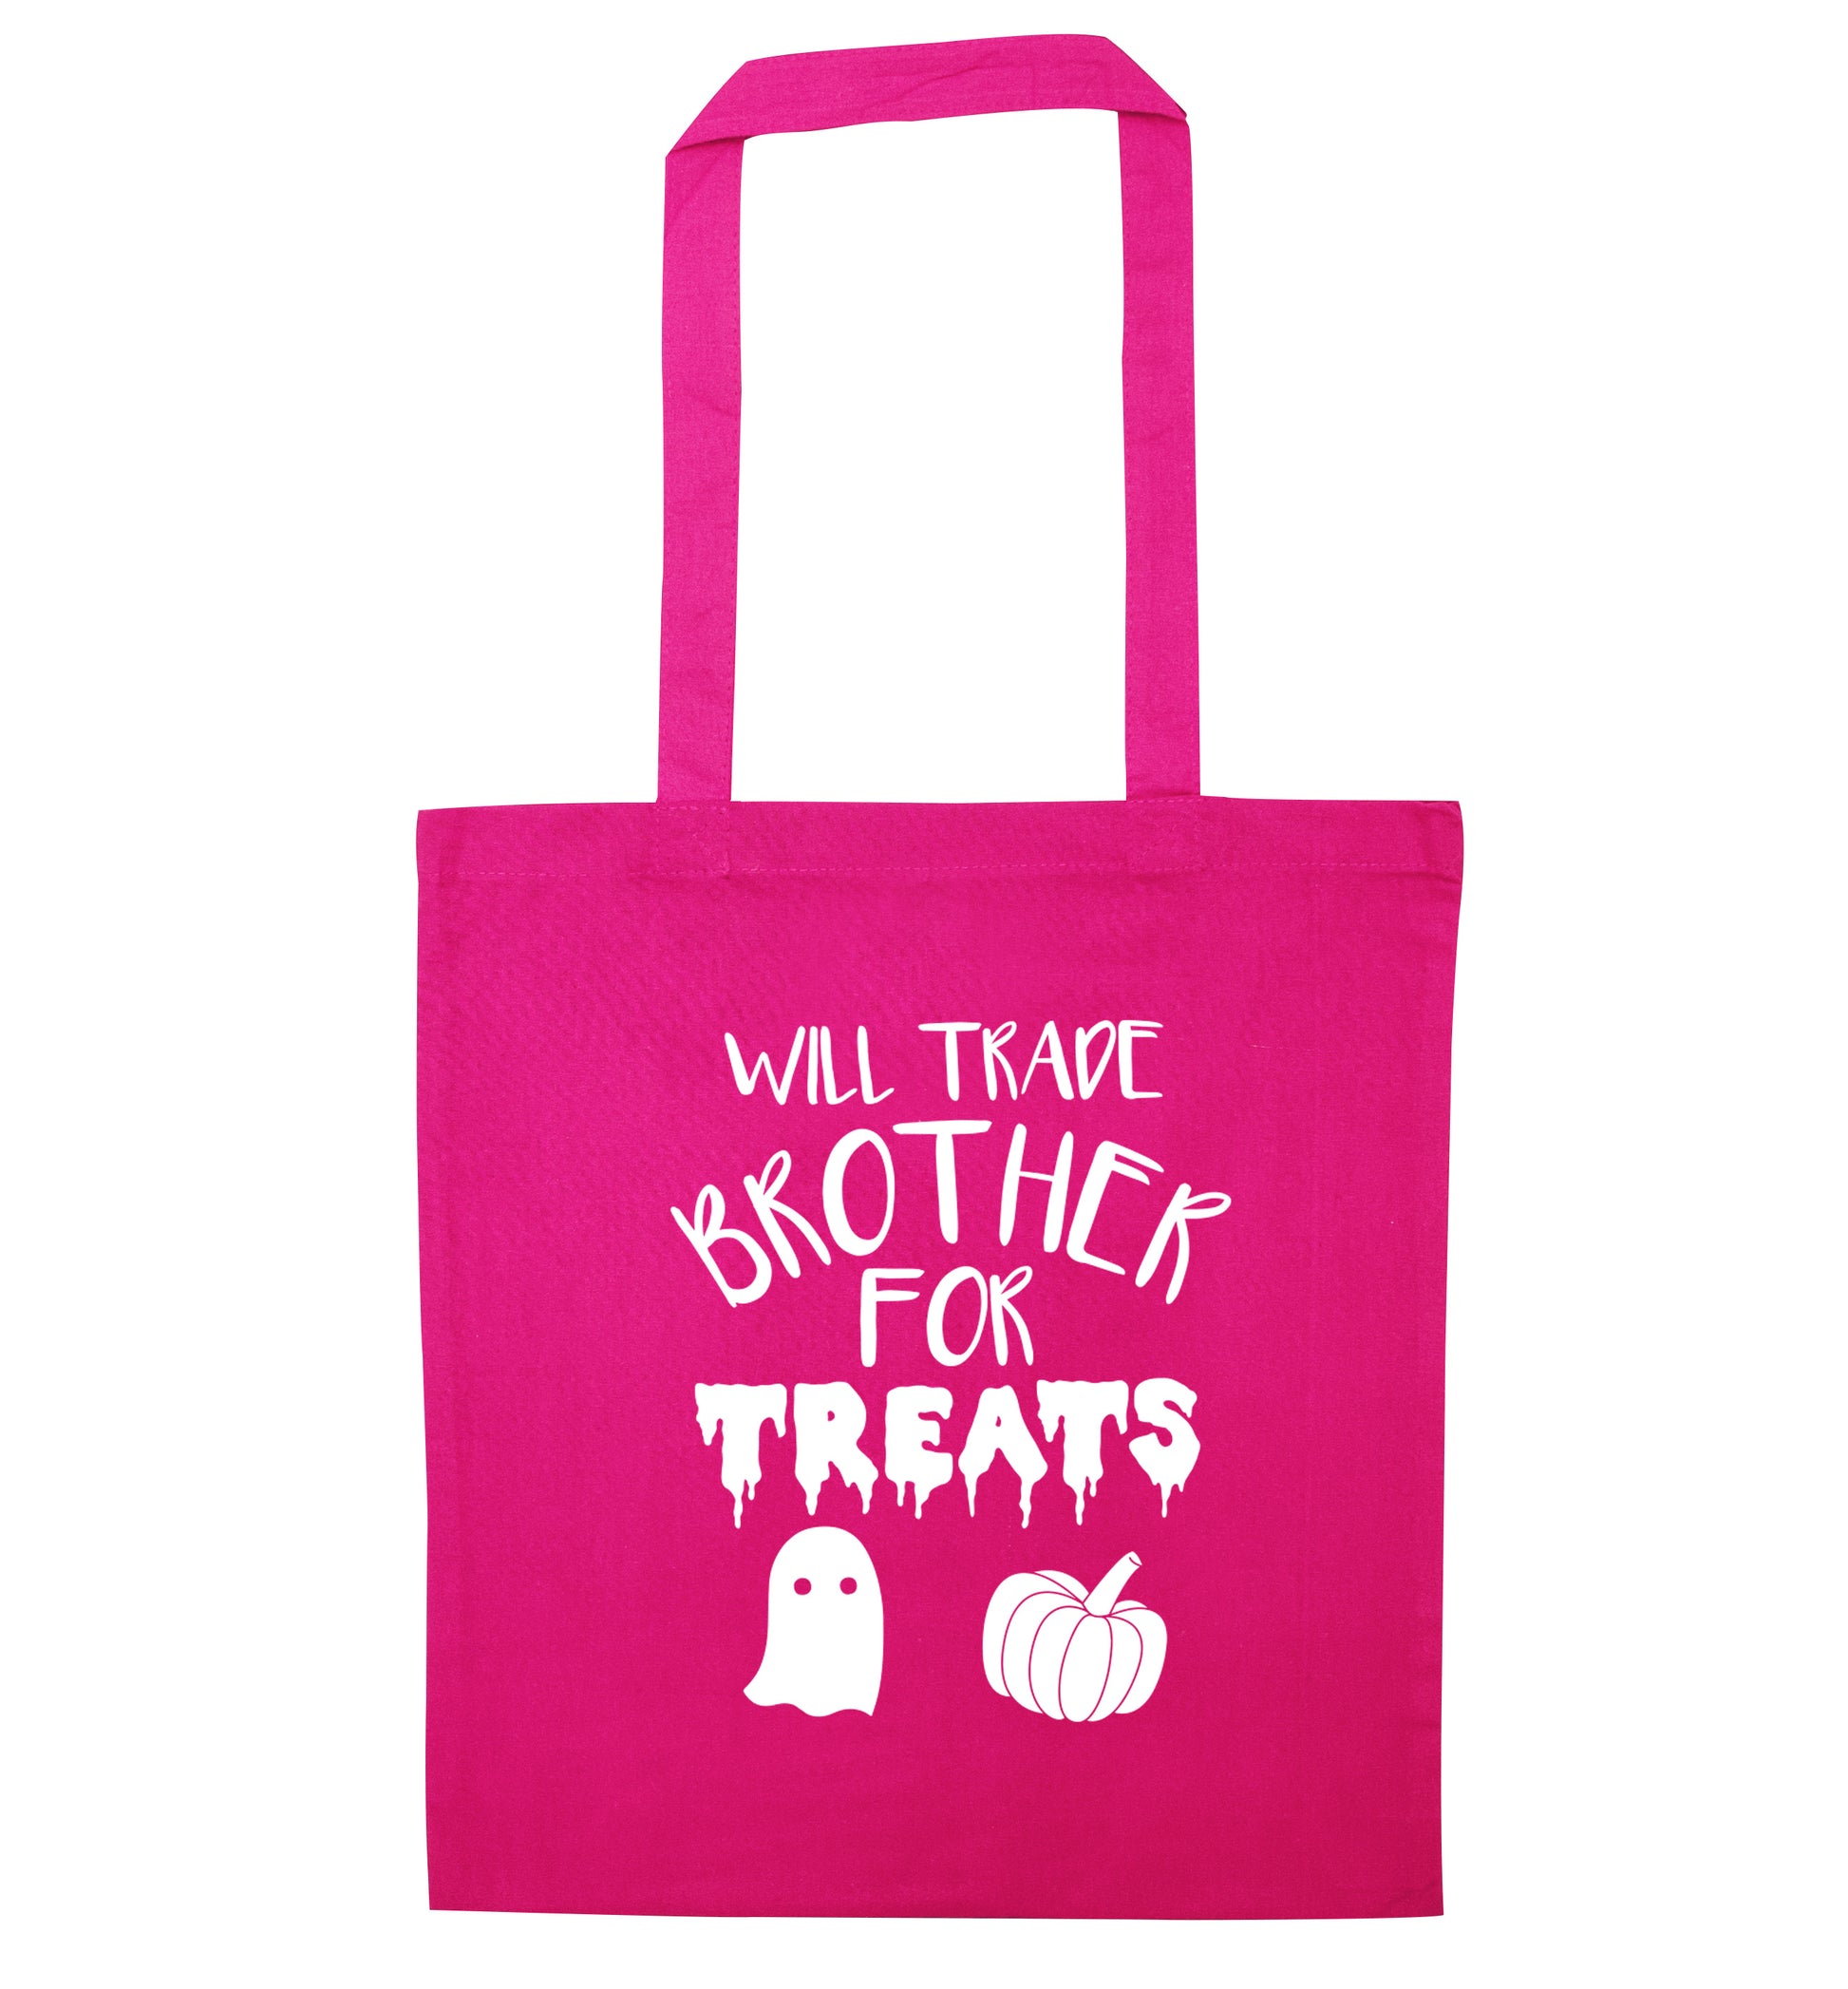 Will trade brother for sweets pink tote bag